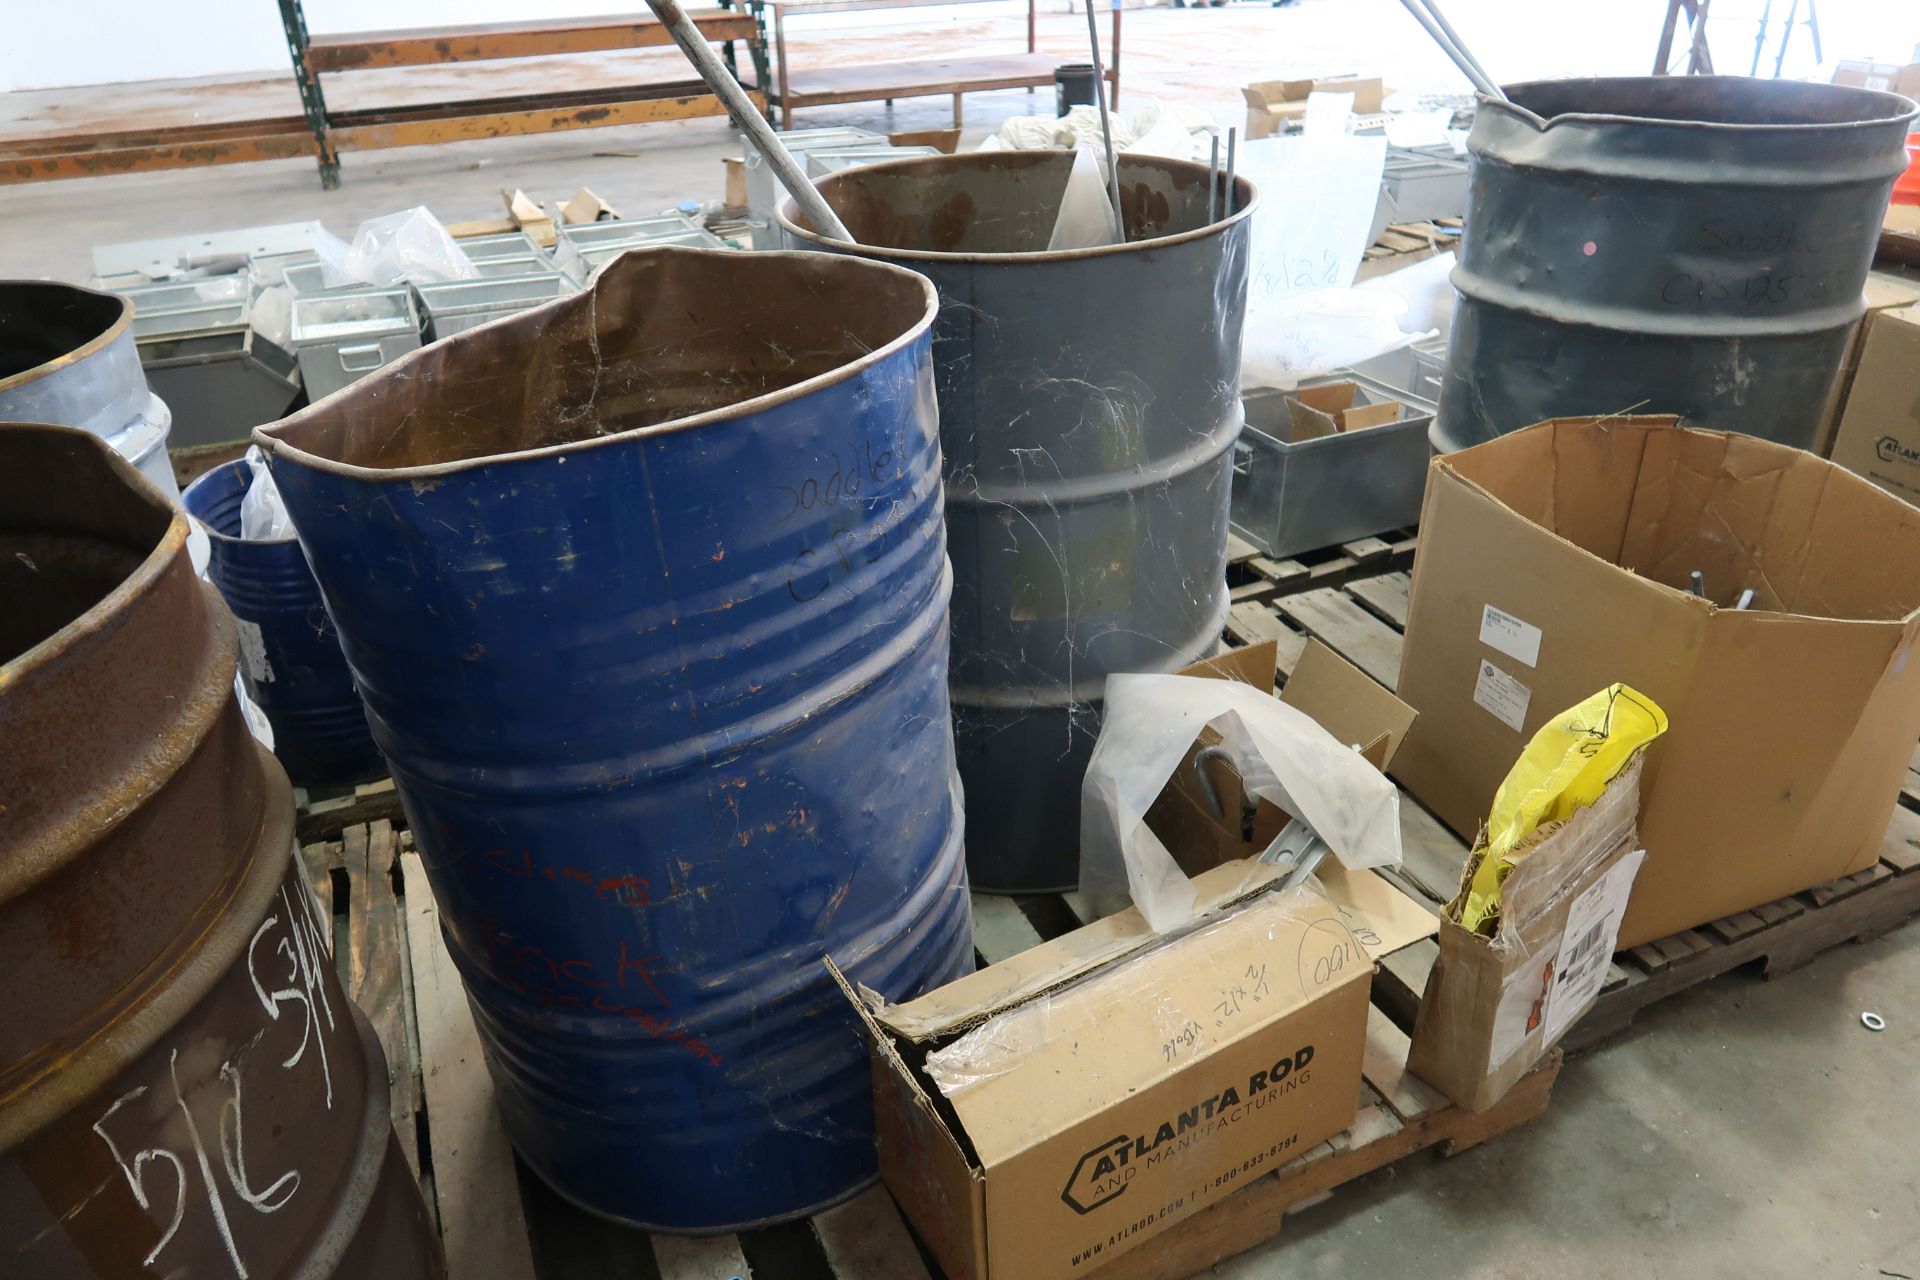 SKID MISCELLANEOUS GALVANIZED TOWER COMPONENTS AND HARDWARE